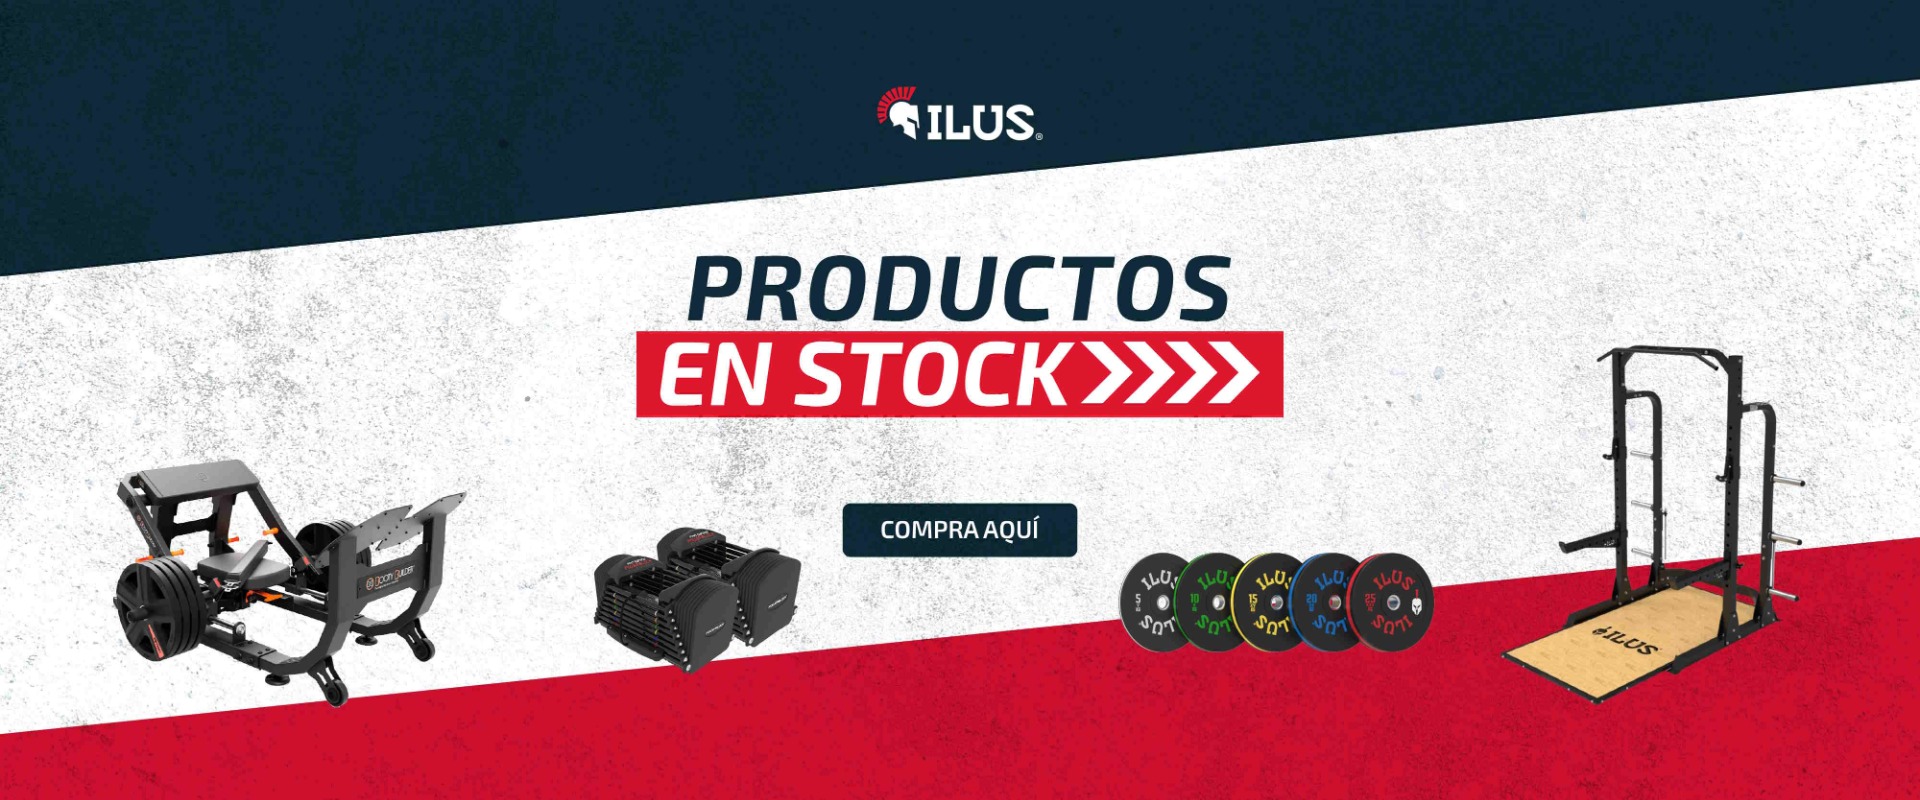 /equipamiento.html?is_in_stock=1&product_list_limit=36